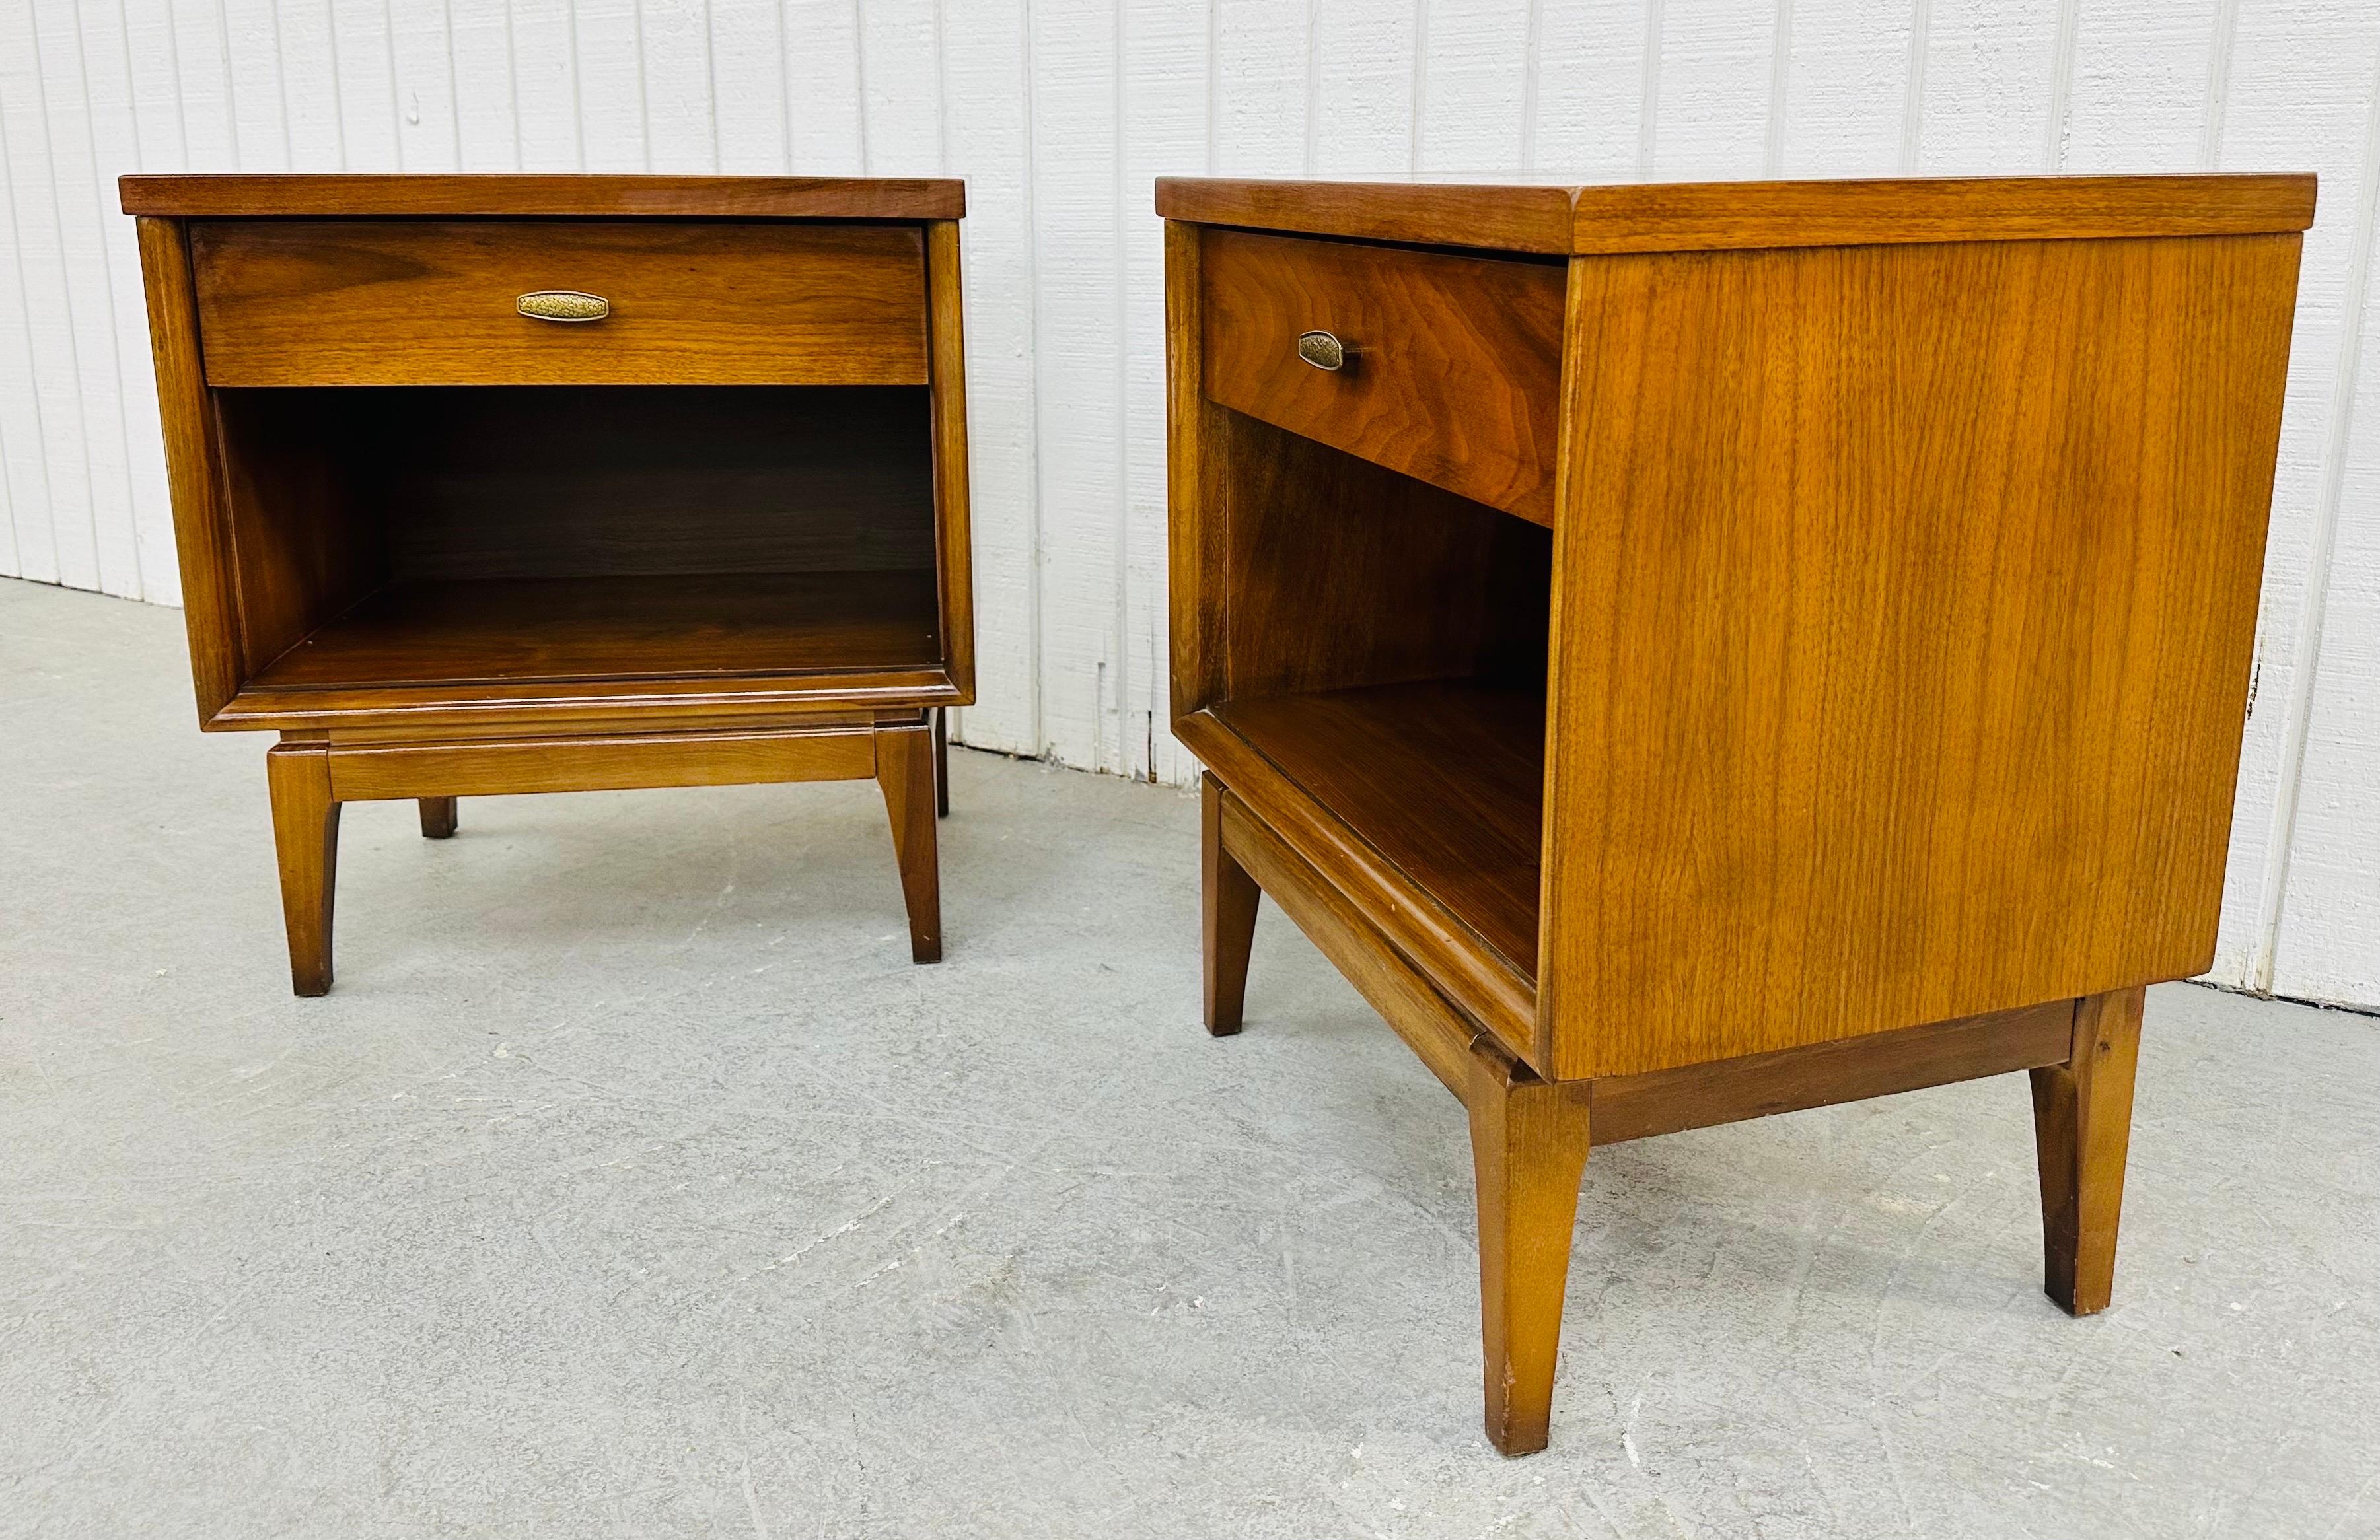 This listing is for a pair of Mid-Century Modern Walnut Nightstands. Featuring a straight line design, single drawer with original hardware, open storage space at the bottom, modern legs, and a beautiful walnut finish. This is an exceptional